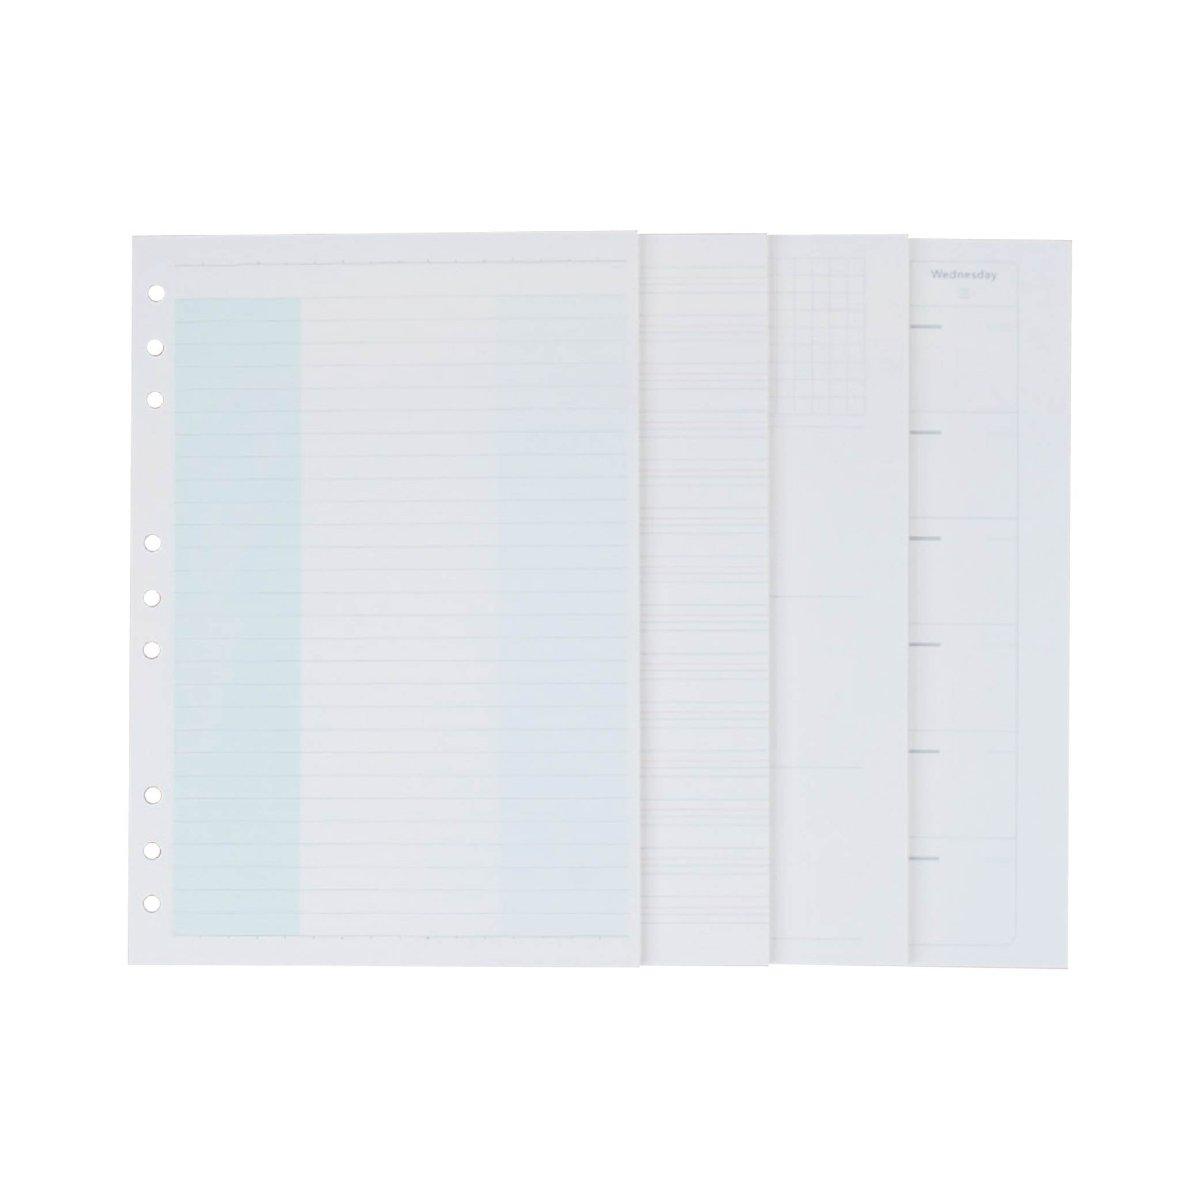 Loose-leaf paper 9-hole notebook inner page paper replacement core B5 45 sheets NP-H7TIW-512 - CHL-STORE 